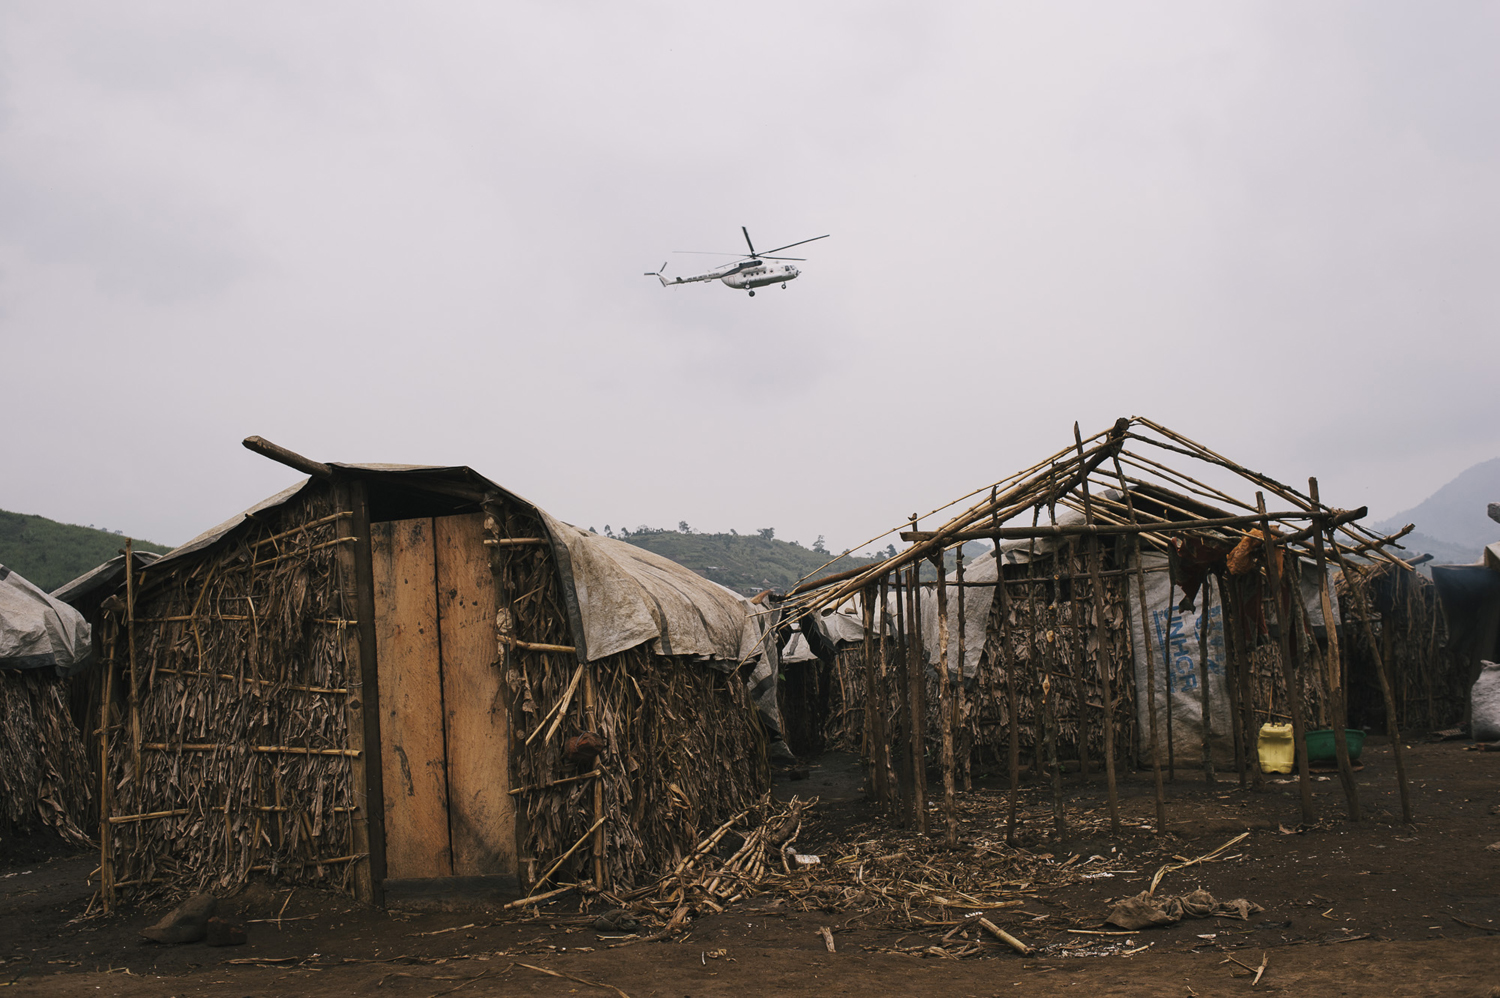 A United Nations helicopter flies over make-shift house in a camp for internally displaced persons in the town of Nyabiondo, July 21, 2014.